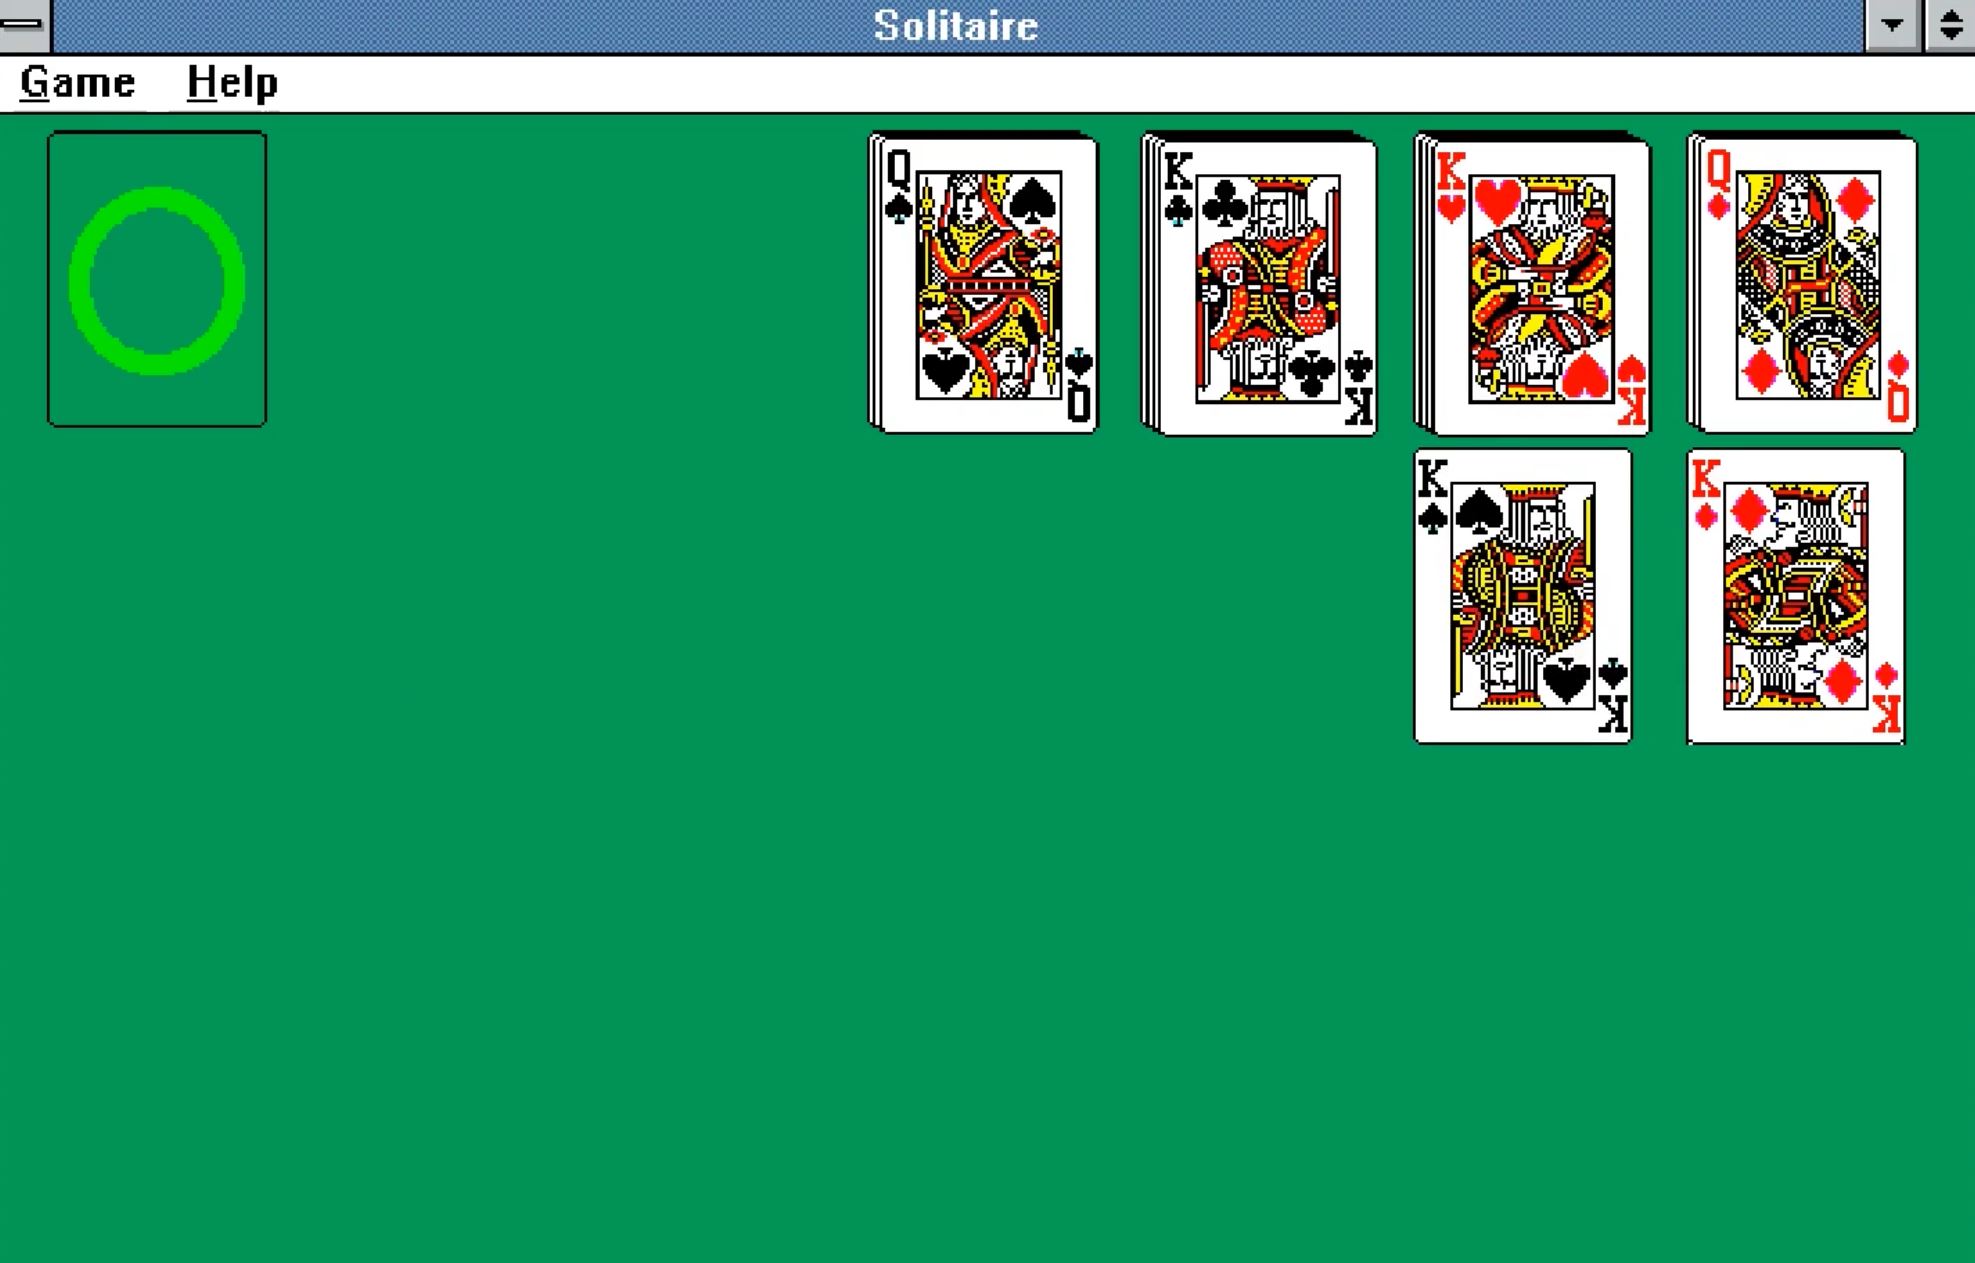 Basket cushion shutter Microsoft Solitaire wants to set a world record today | Windows Central